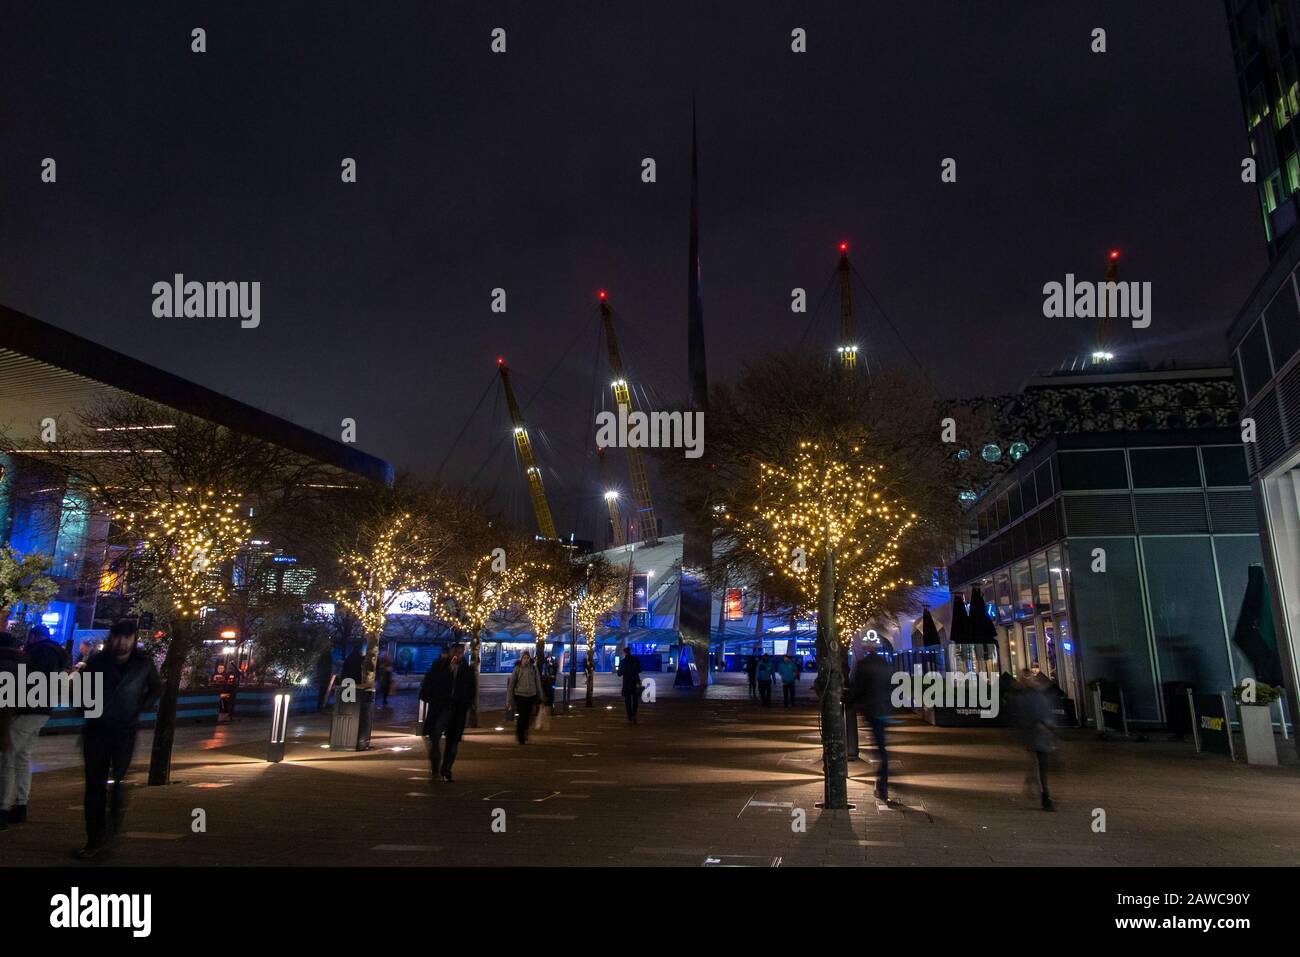 The exterior of the O2 Millennium Dome in North Greenwich, London with winter lights in the trees Stock Photo